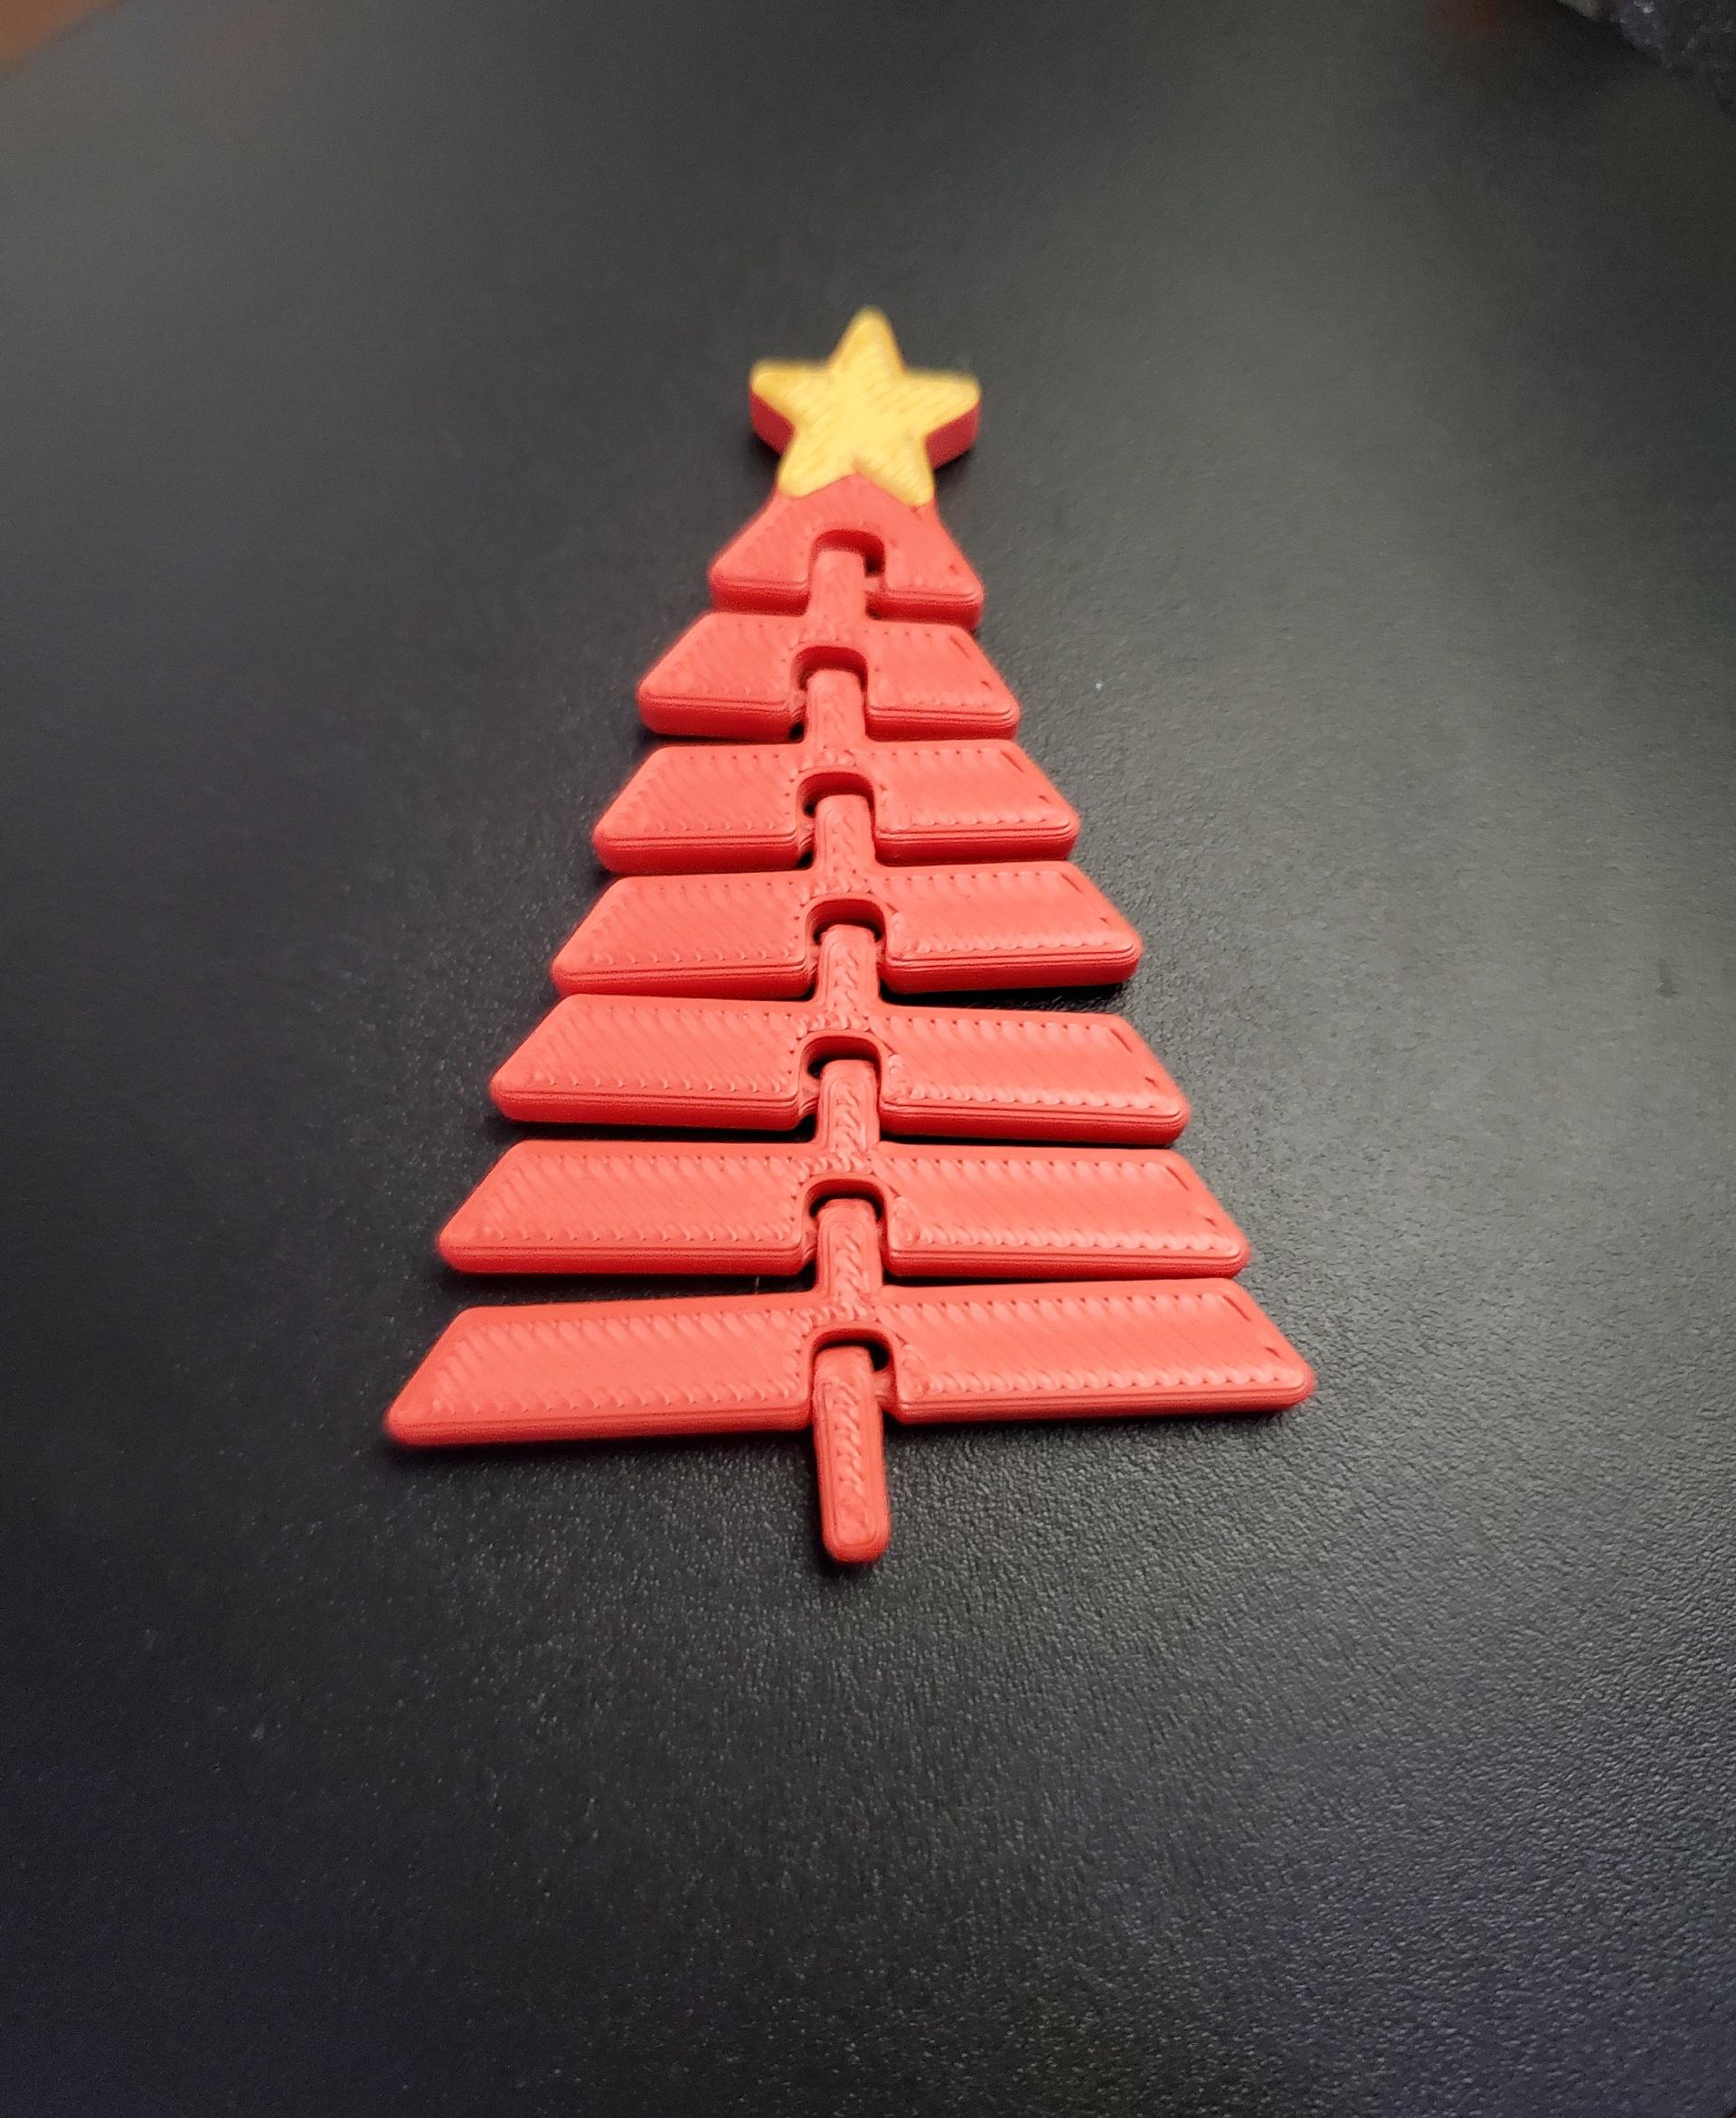 Articulated Christmas Tree with Star - Print in place fidget toy - 3mf - esun gloss red - 3d model